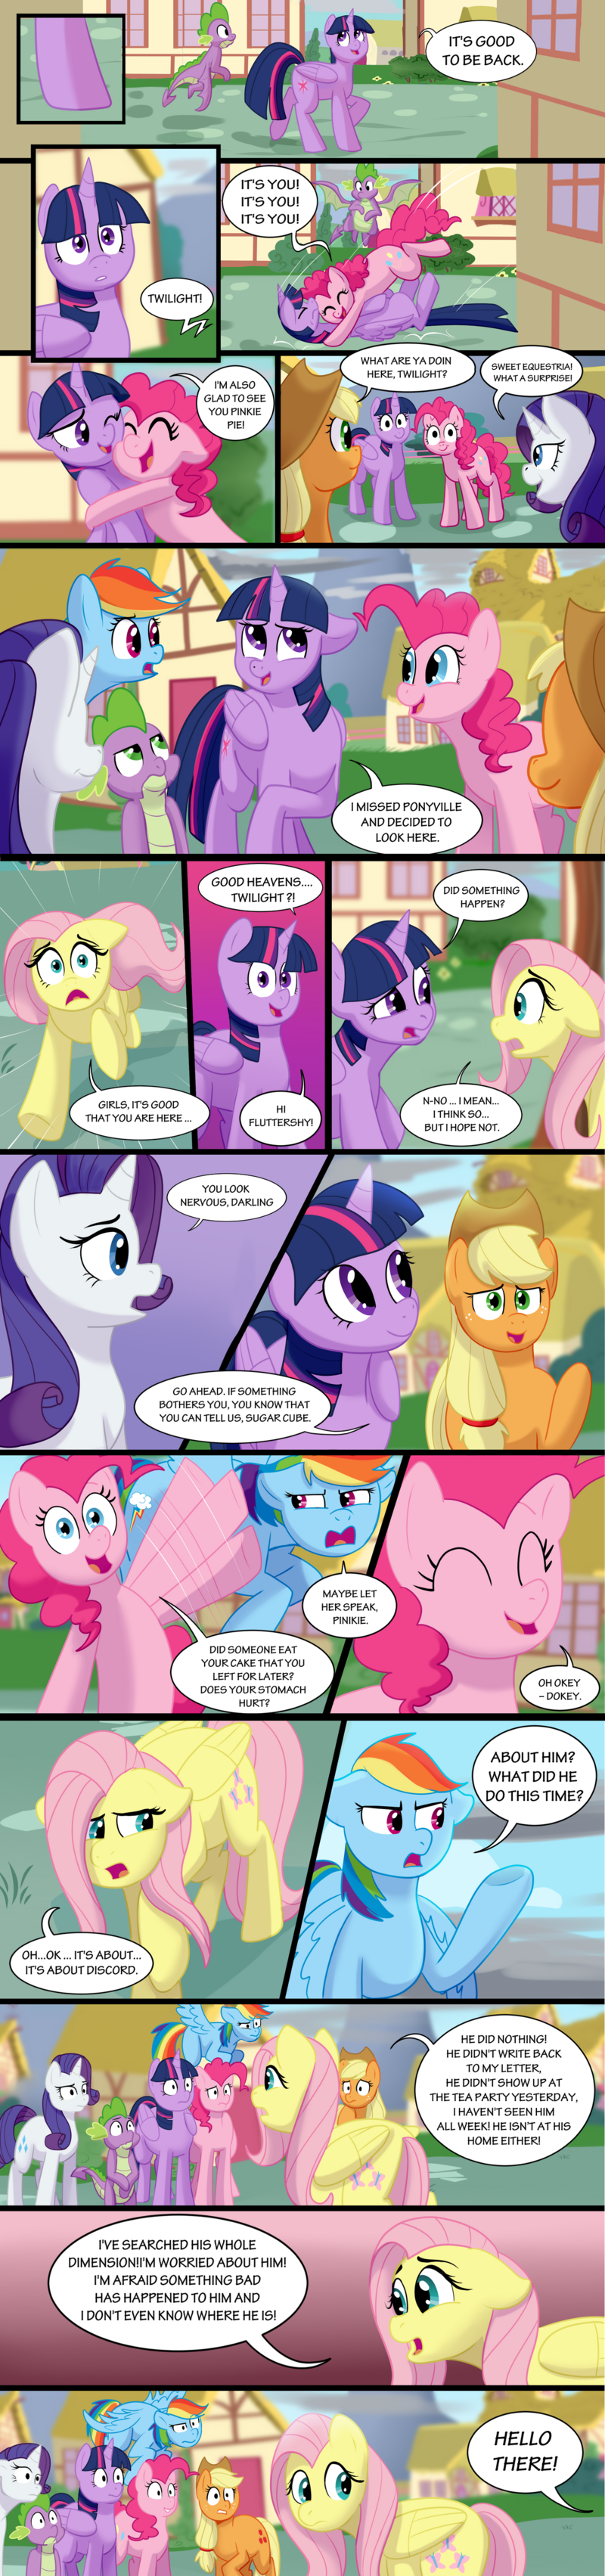 Page 52-54: Where is Discord